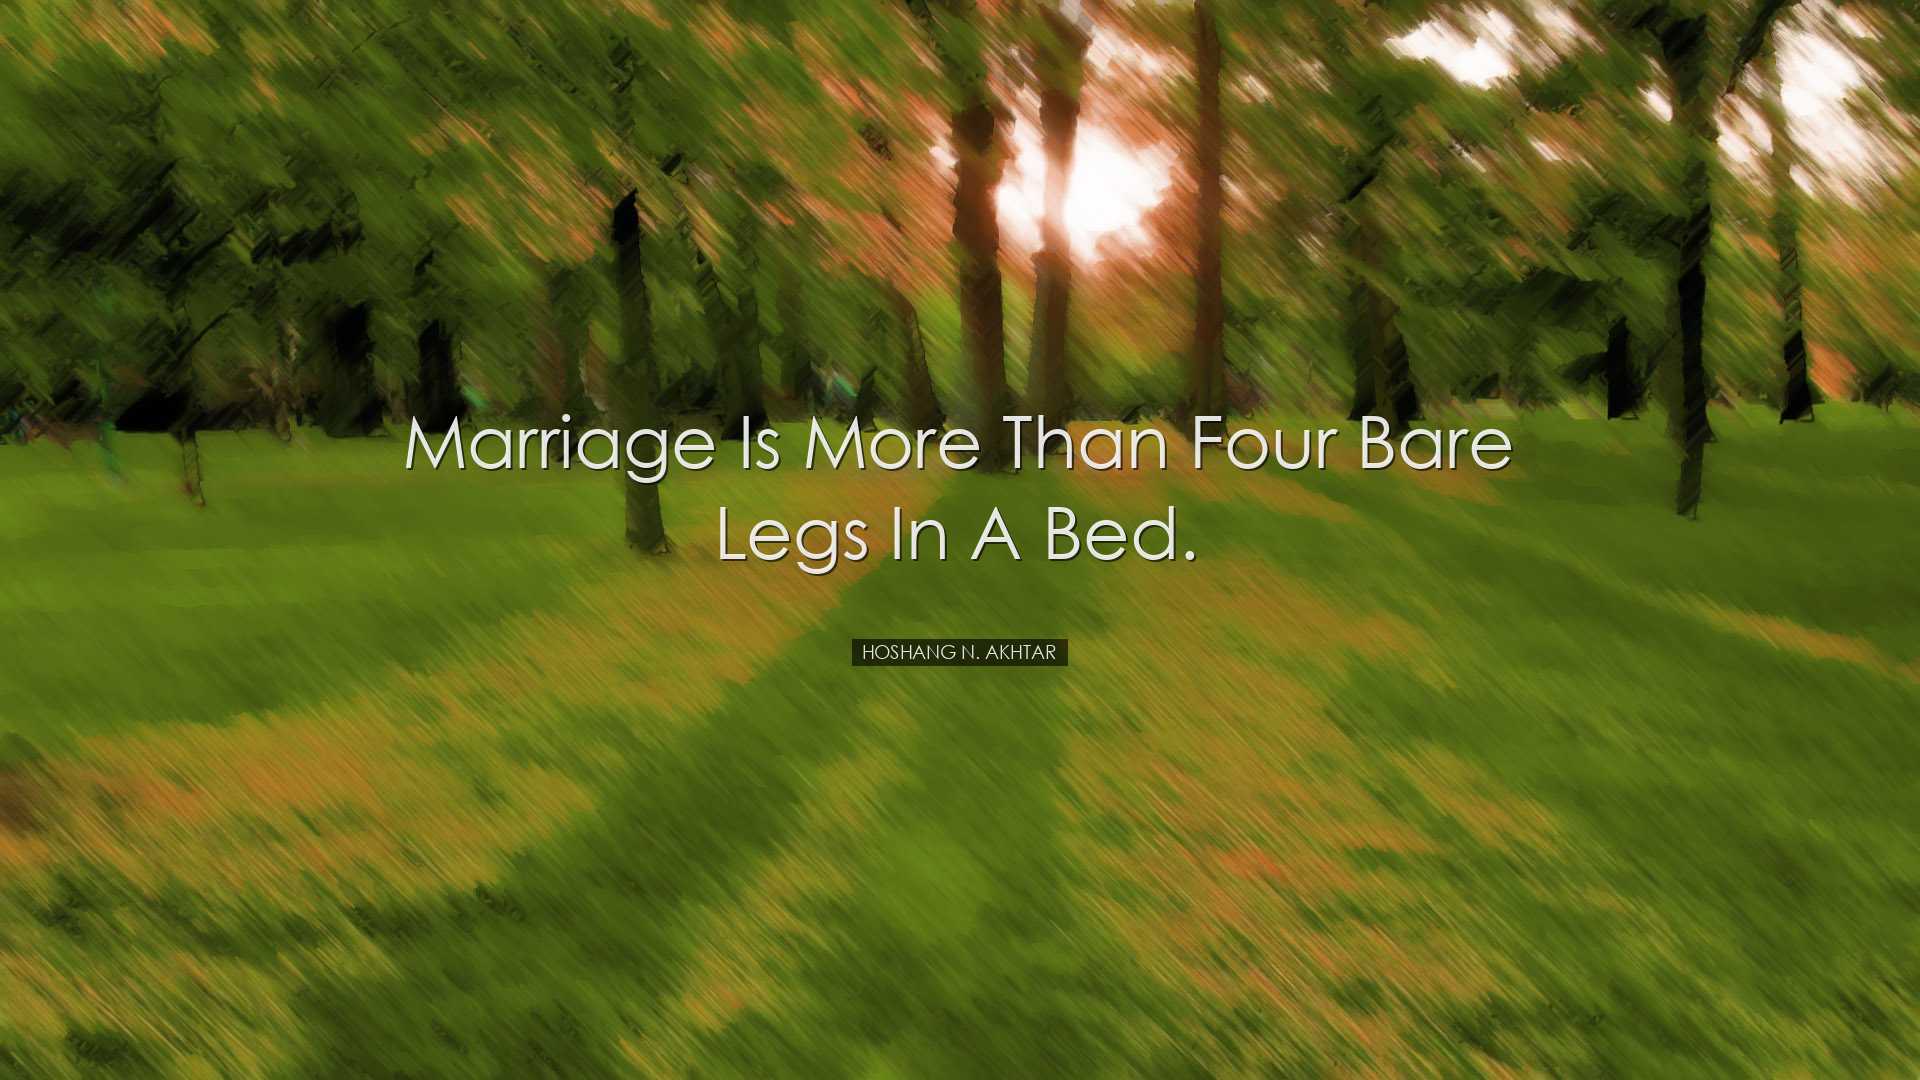 Marriage is more than four bare legs in a bed. - Hoshang N. Akhtar